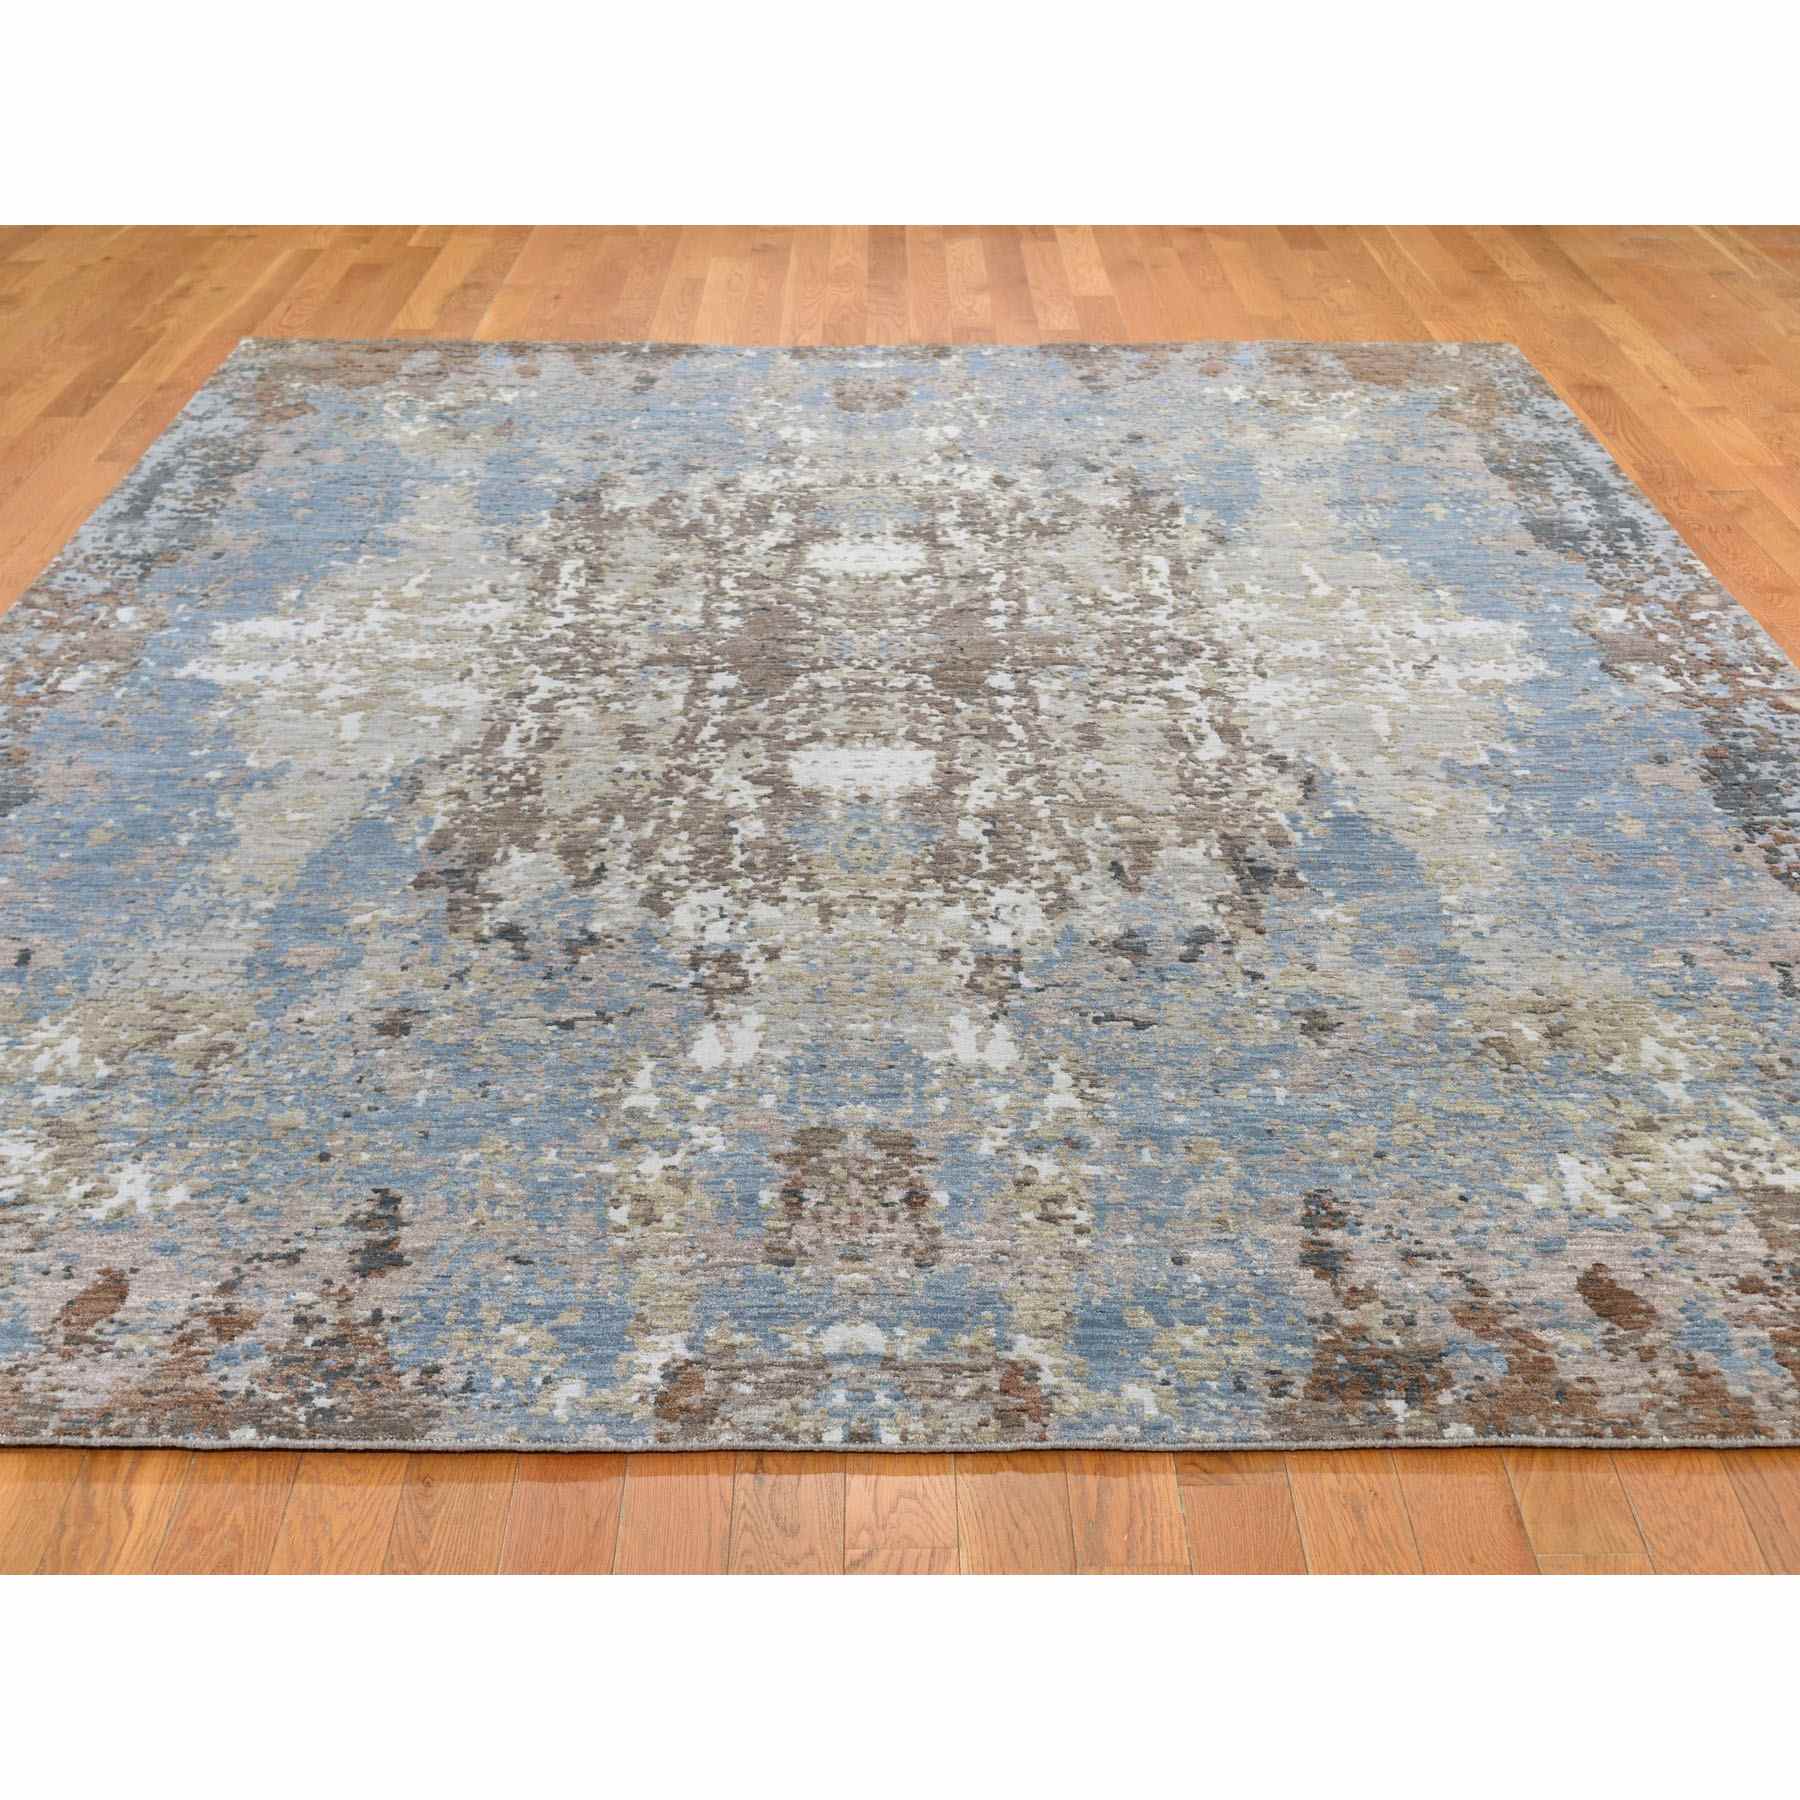 7-10 x10- Blue Abstract Design Wool and Silk Hi-Low Pile Denser Weave Hand Knotted Oriental Rug 